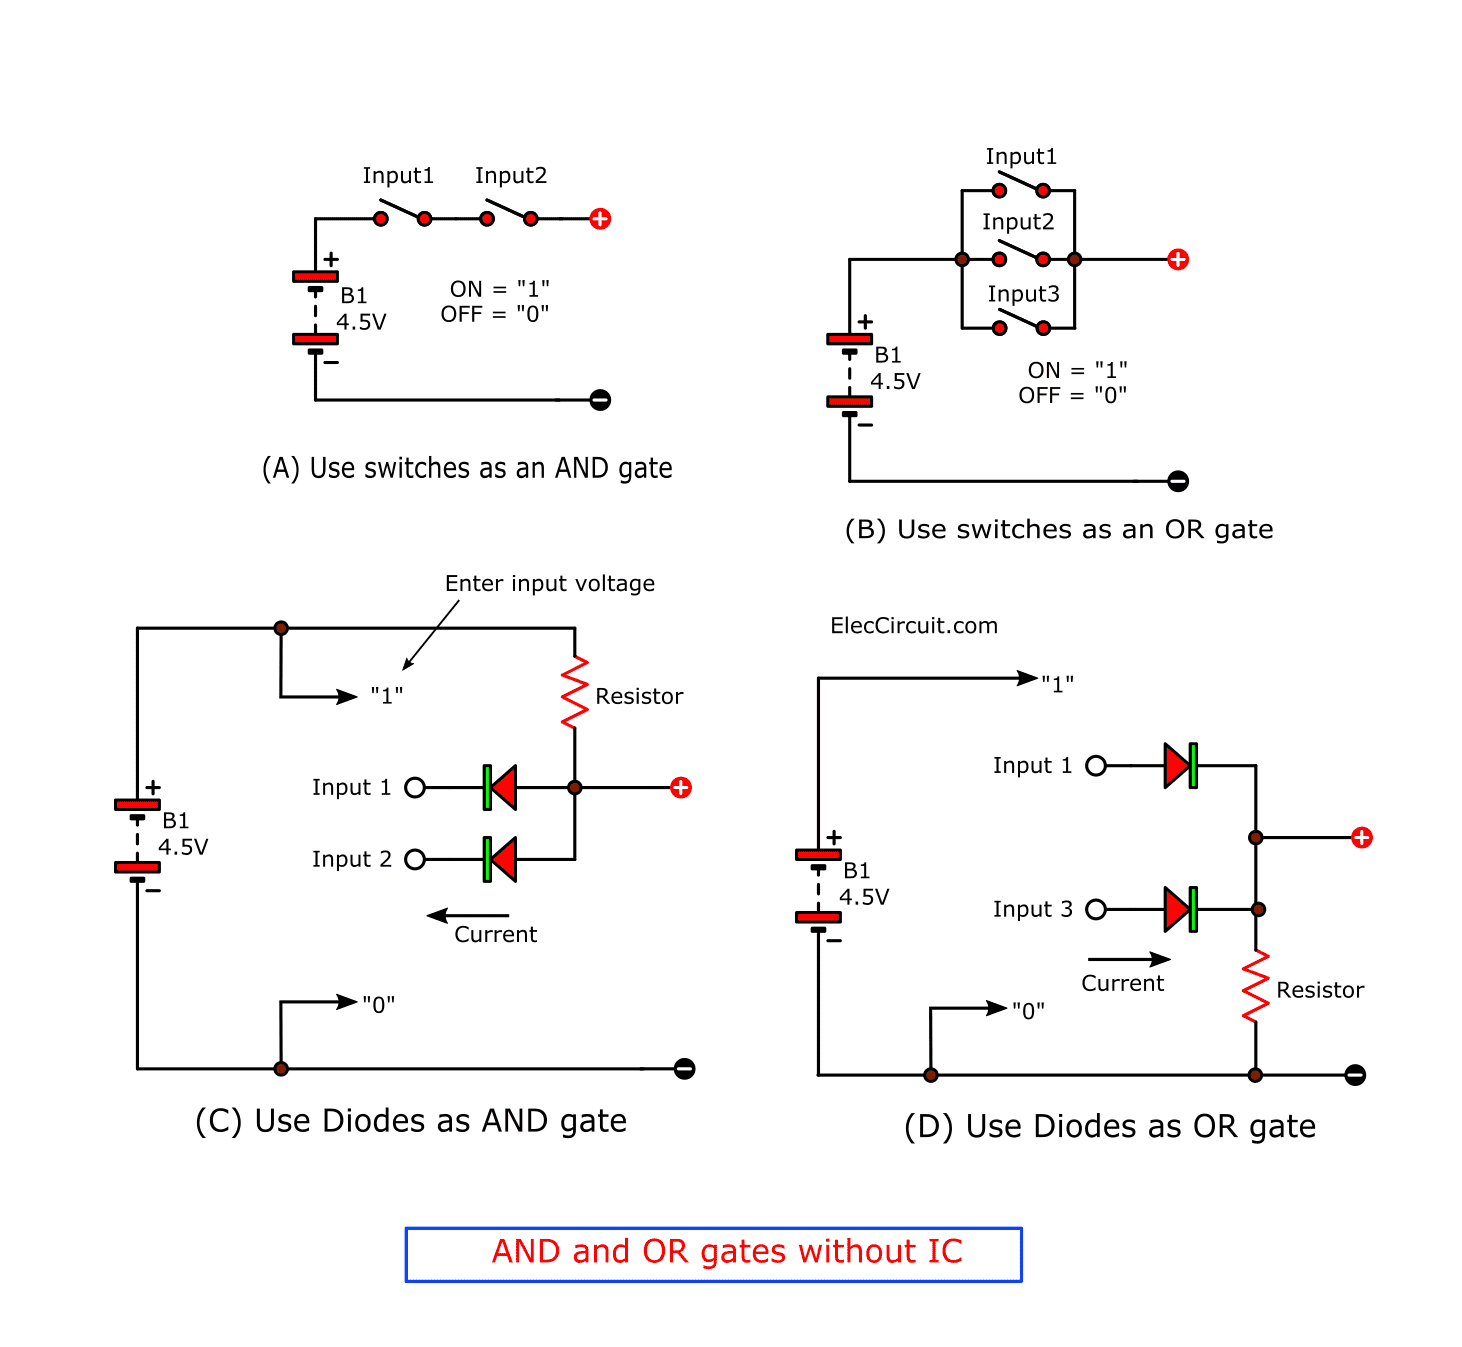 AND and OR gates without IC